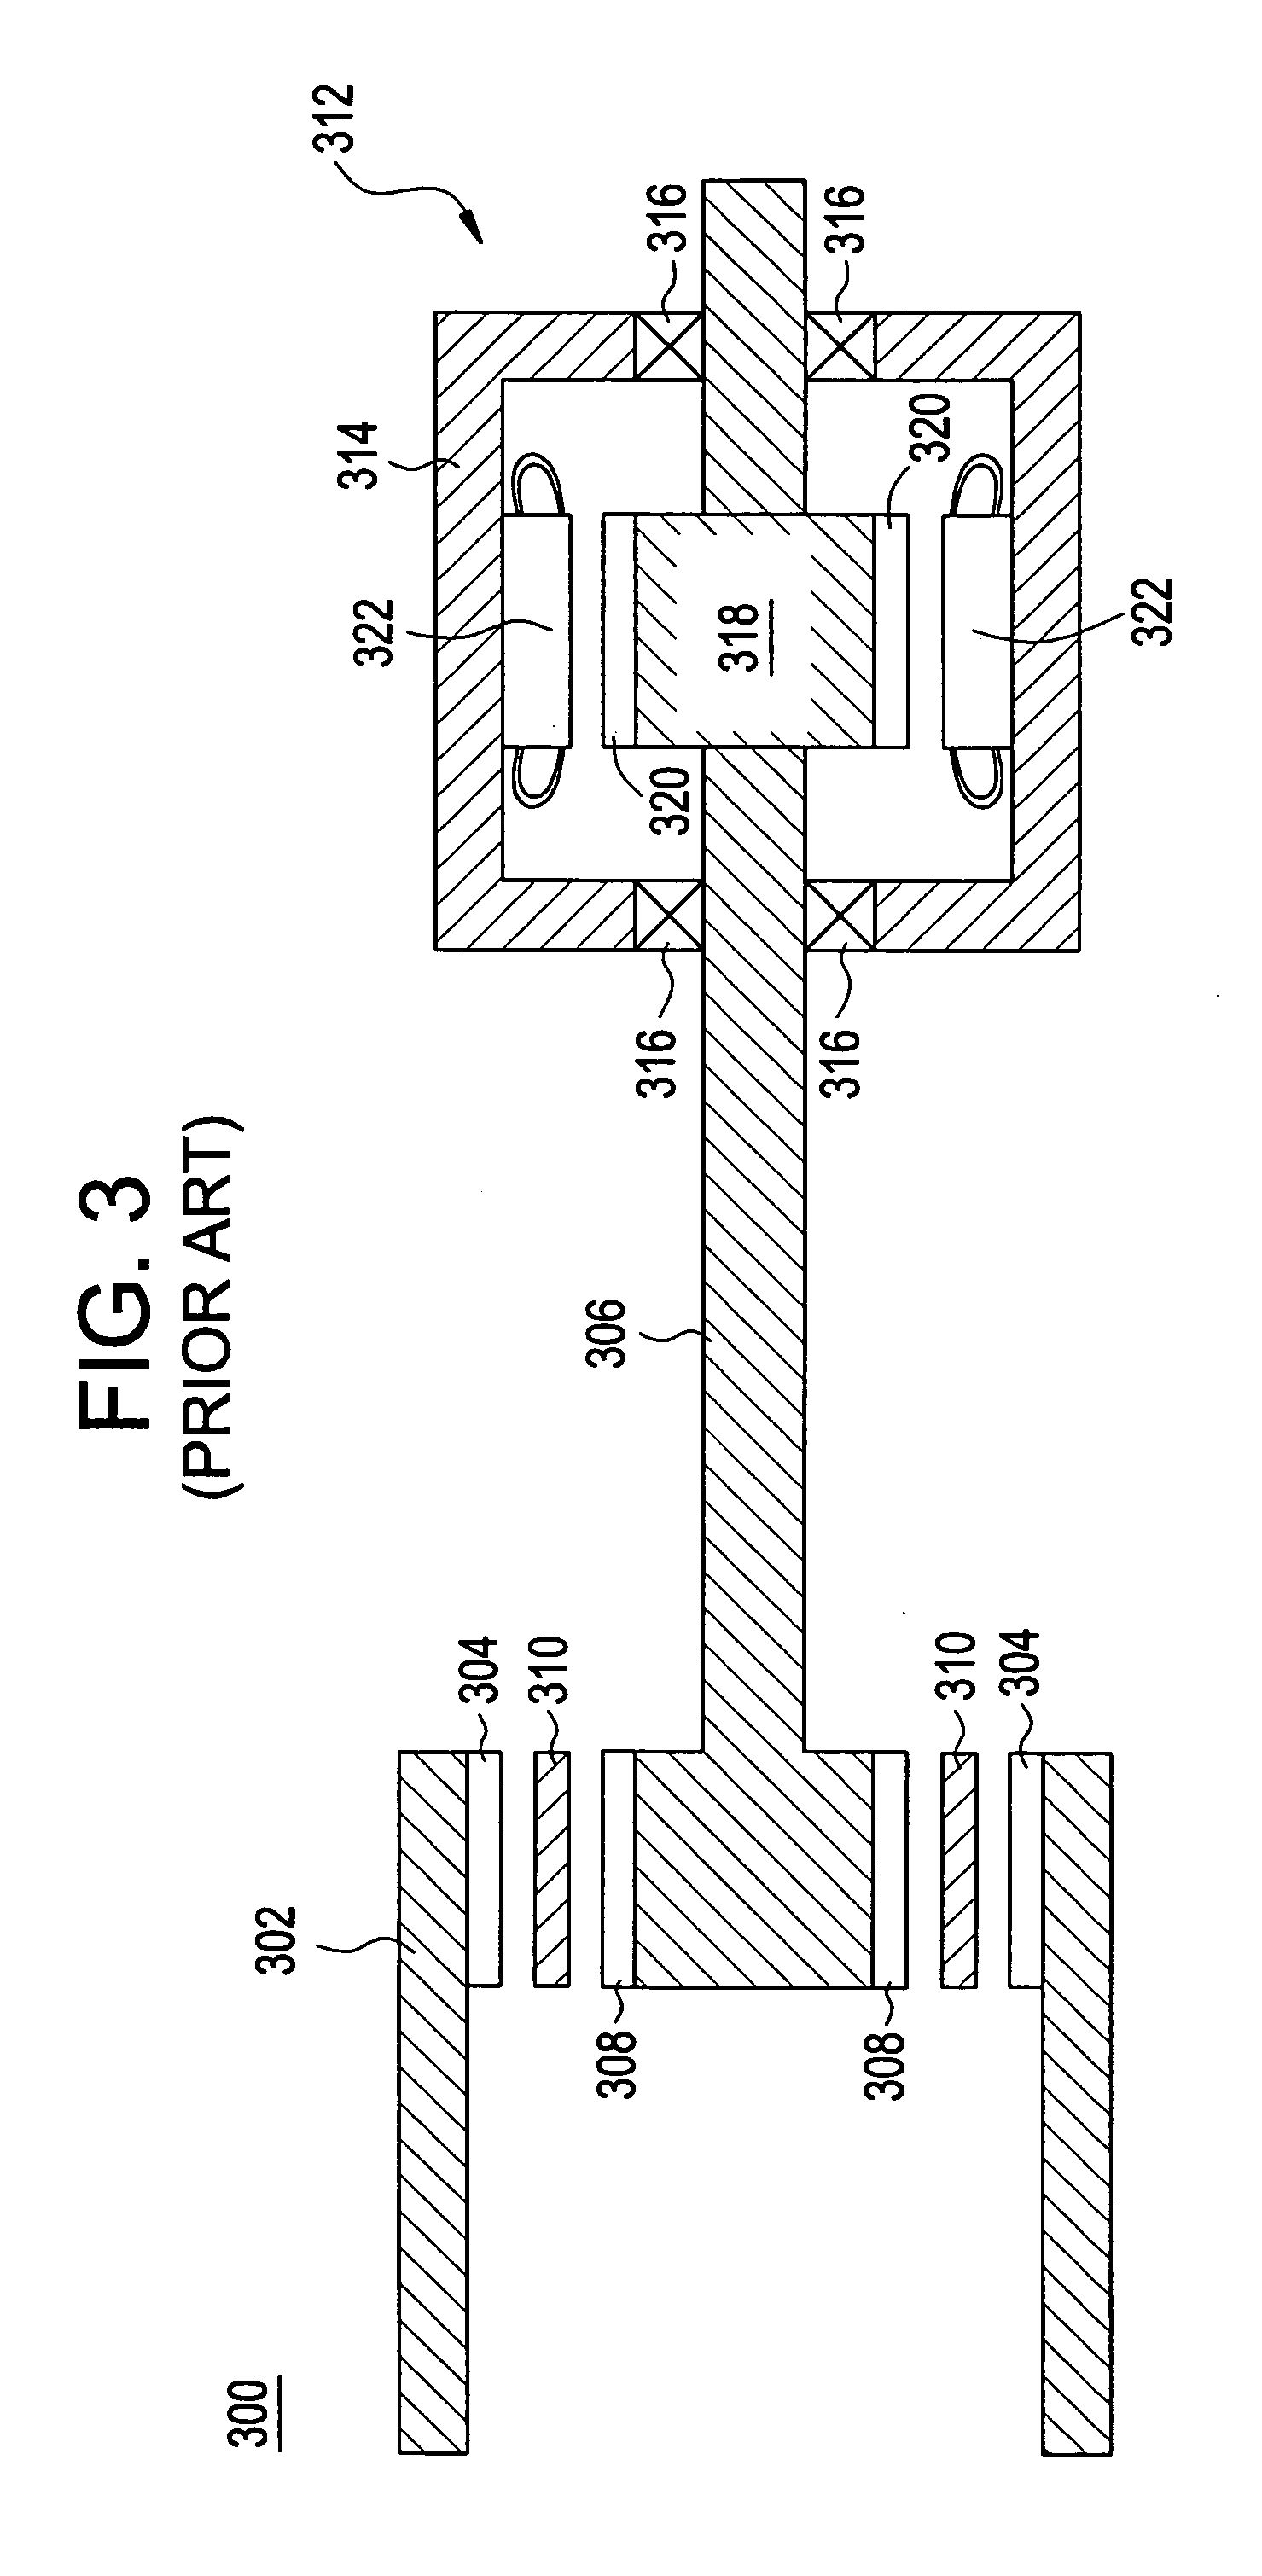 Electric machine apparatus with integrated, high torque density magnetic gearing